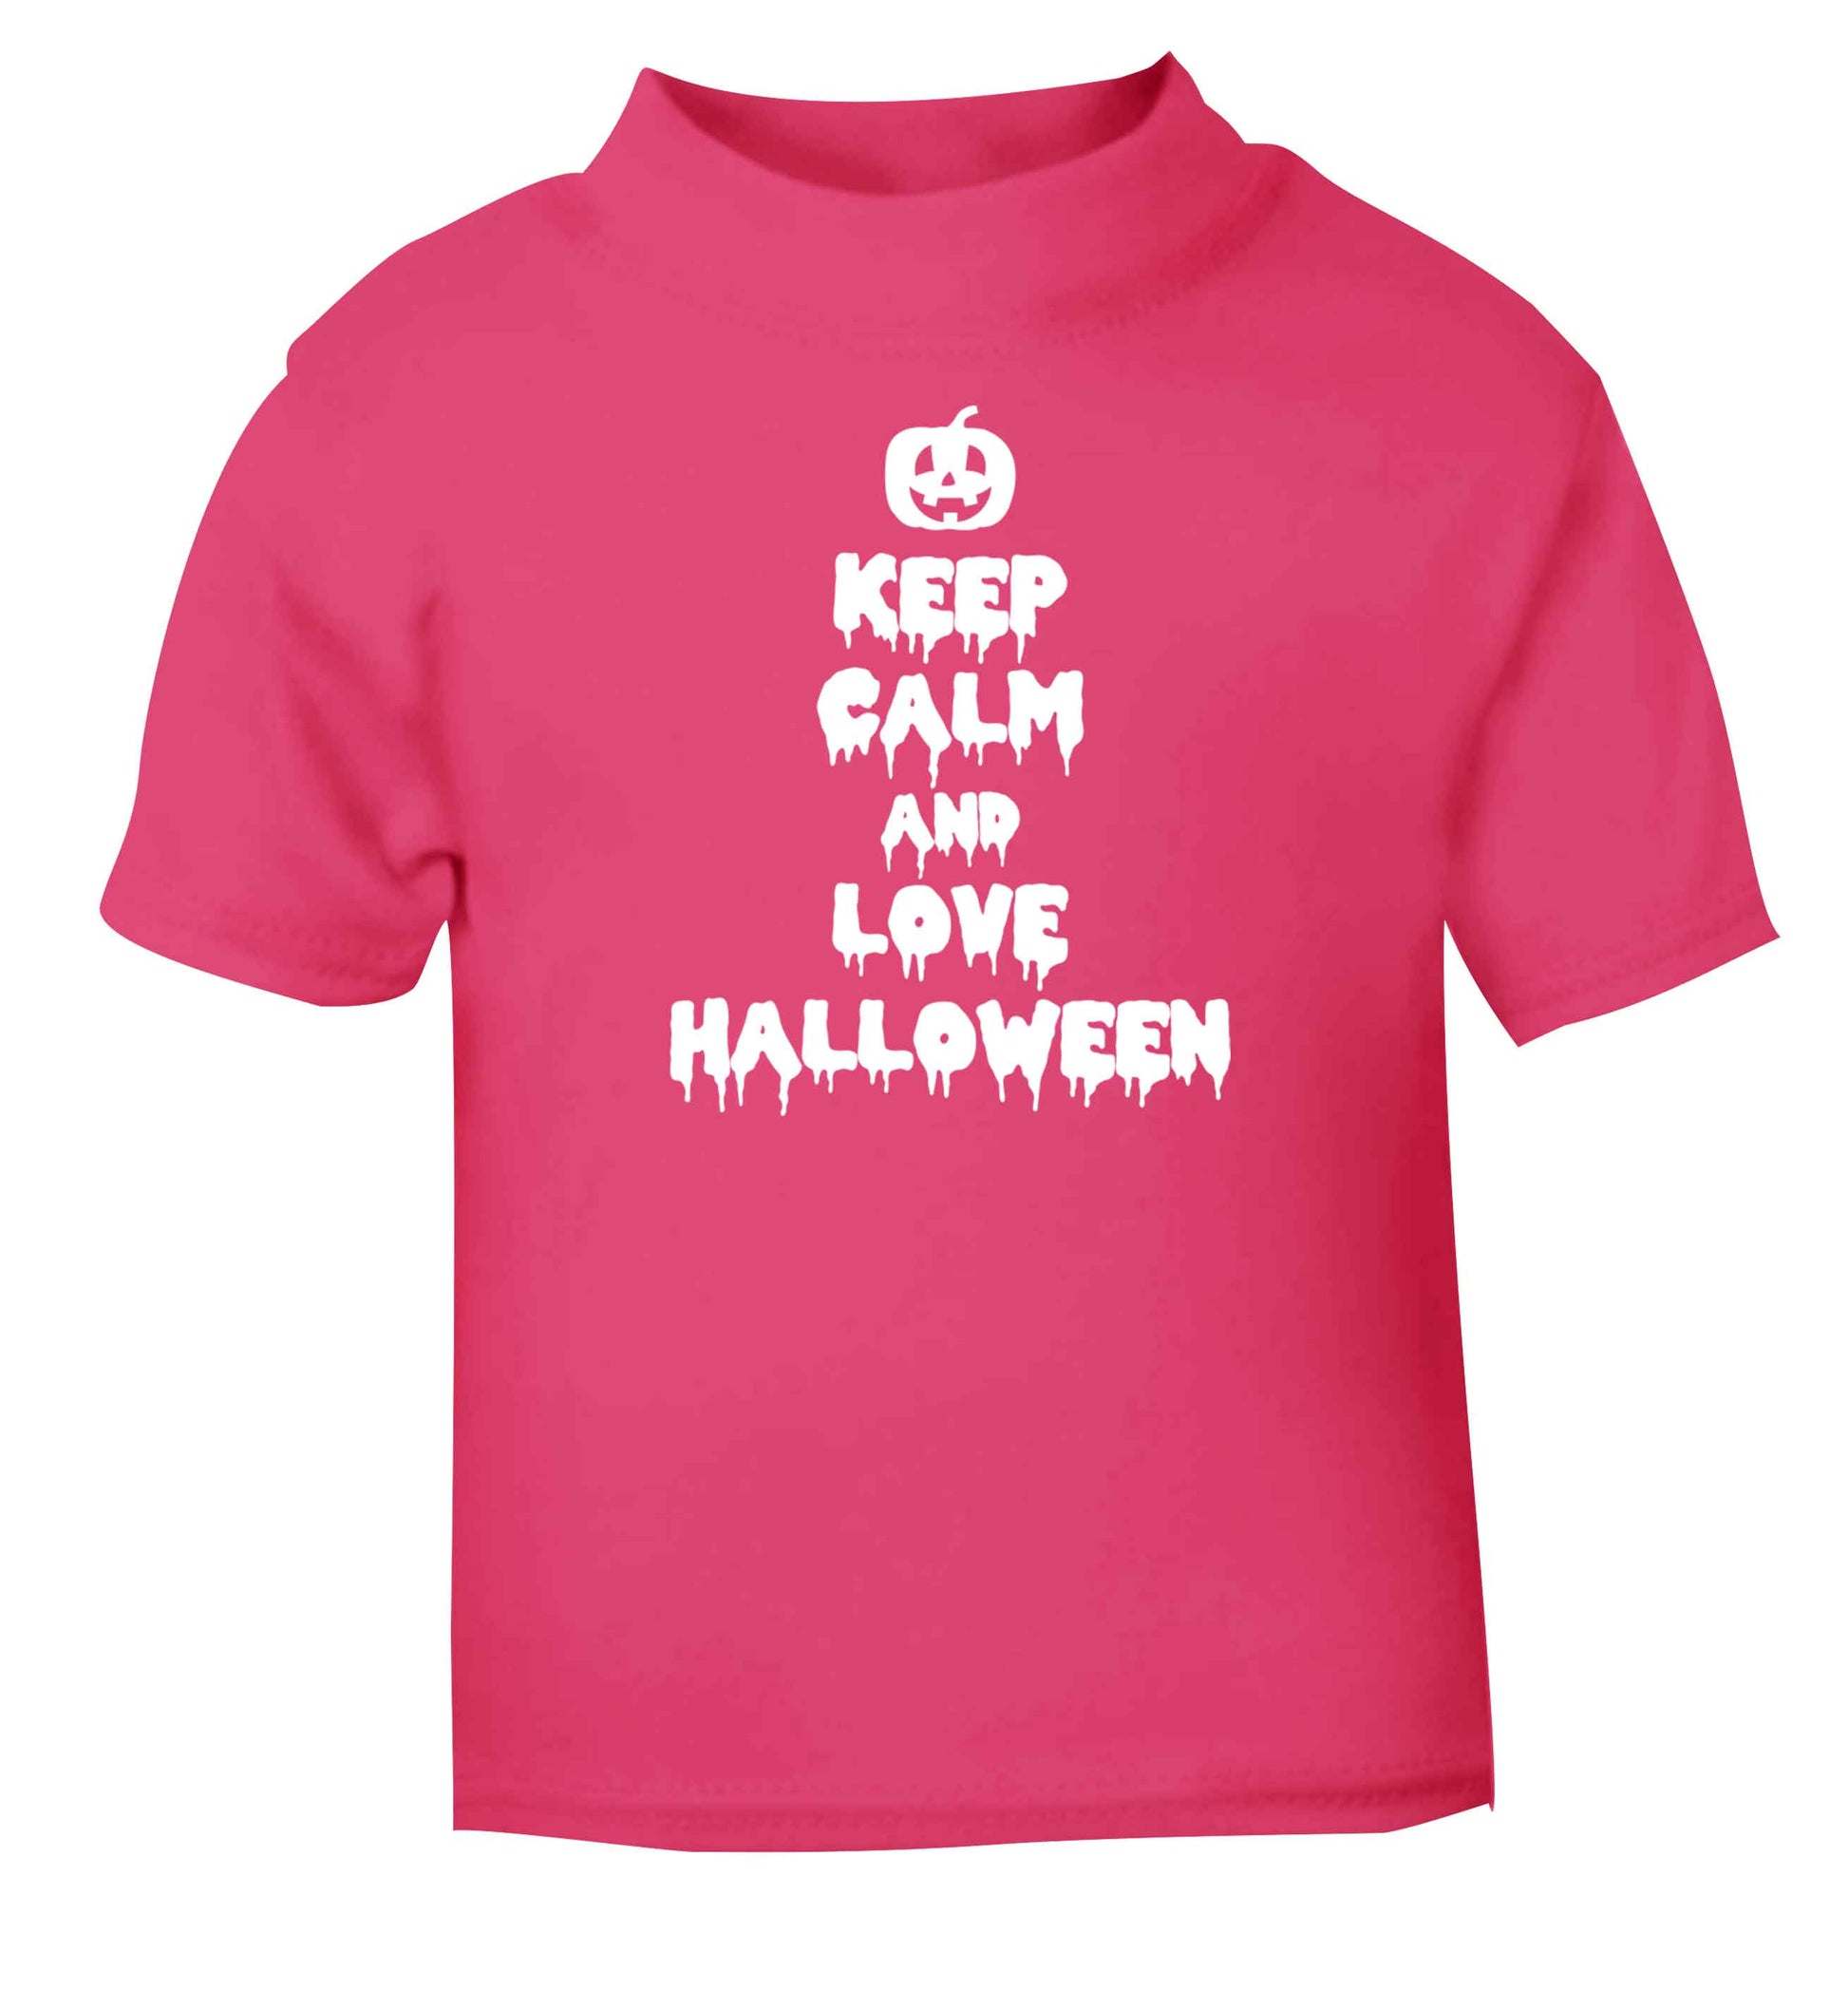 Keep calm and love halloween pink baby toddler Tshirt 2 Years